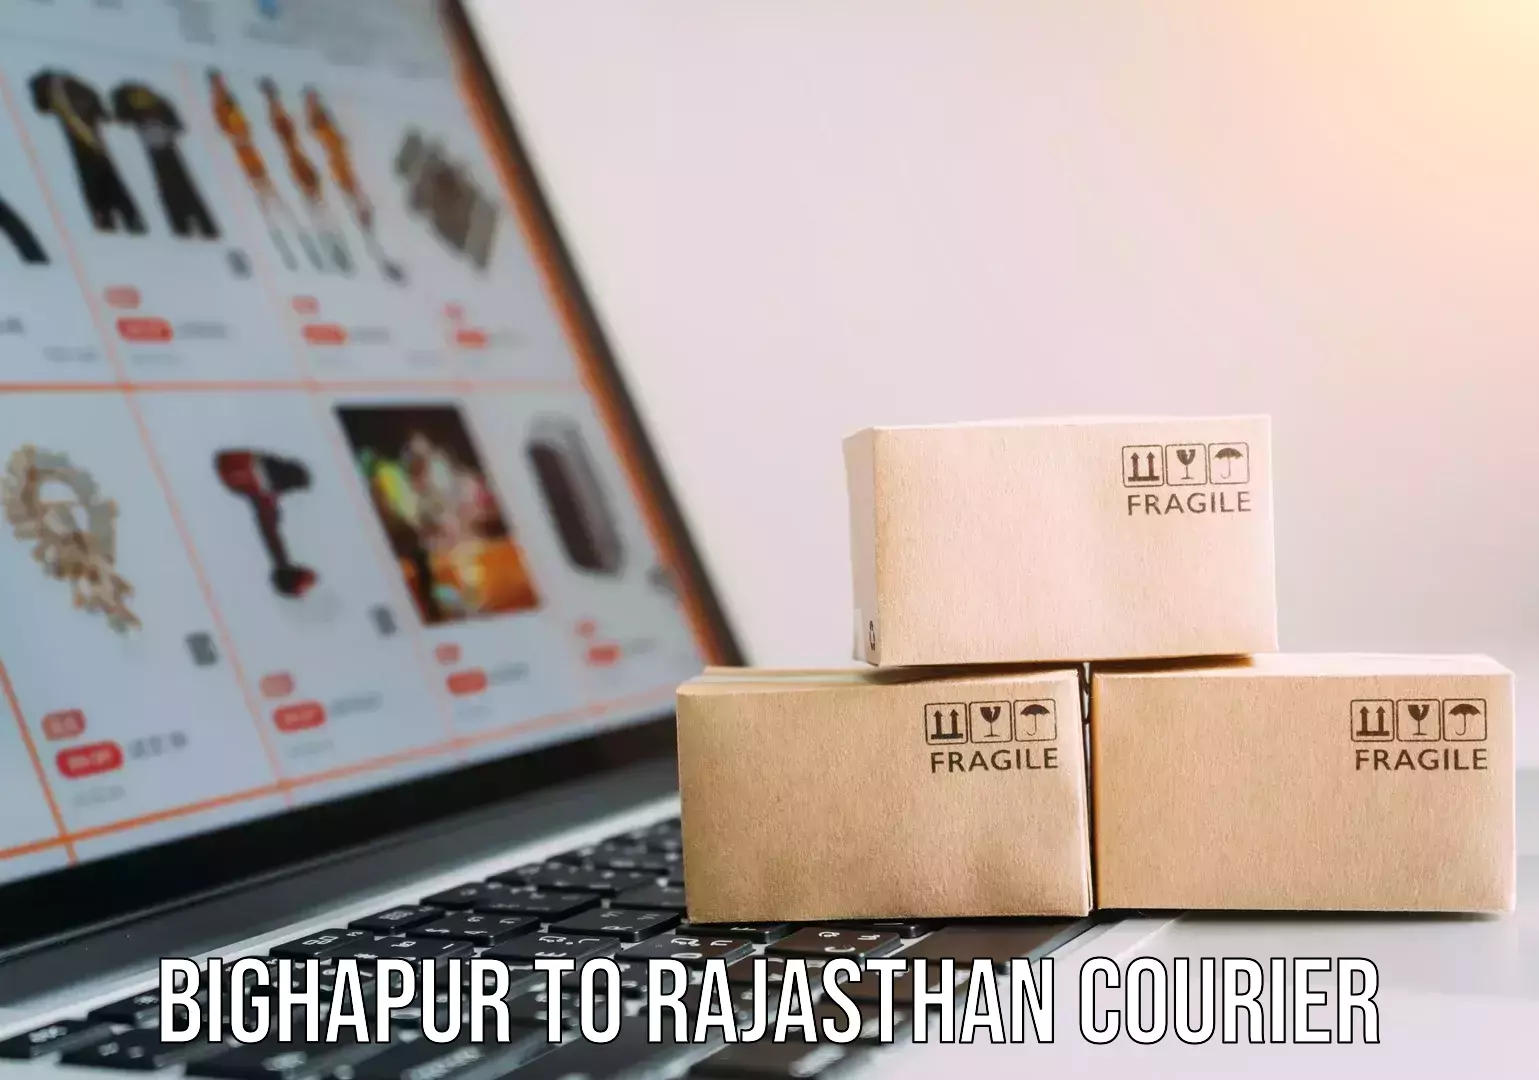 Multi-service courier options Bighapur to Rajasthan